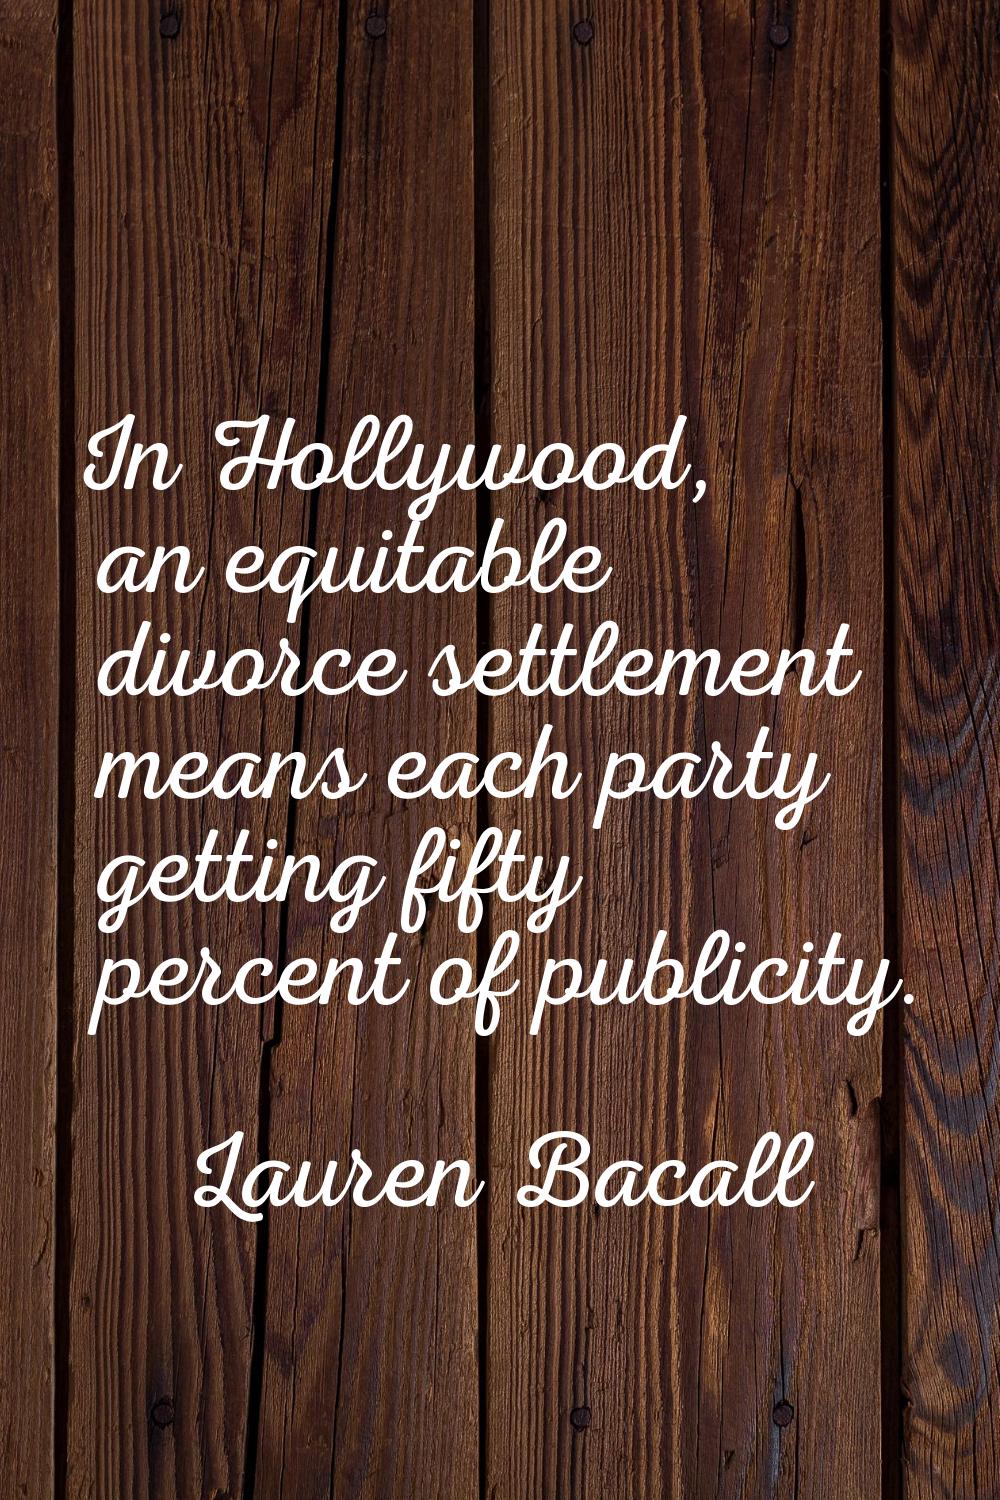 In Hollywood, an equitable divorce settlement means each party getting fifty percent of publicity.